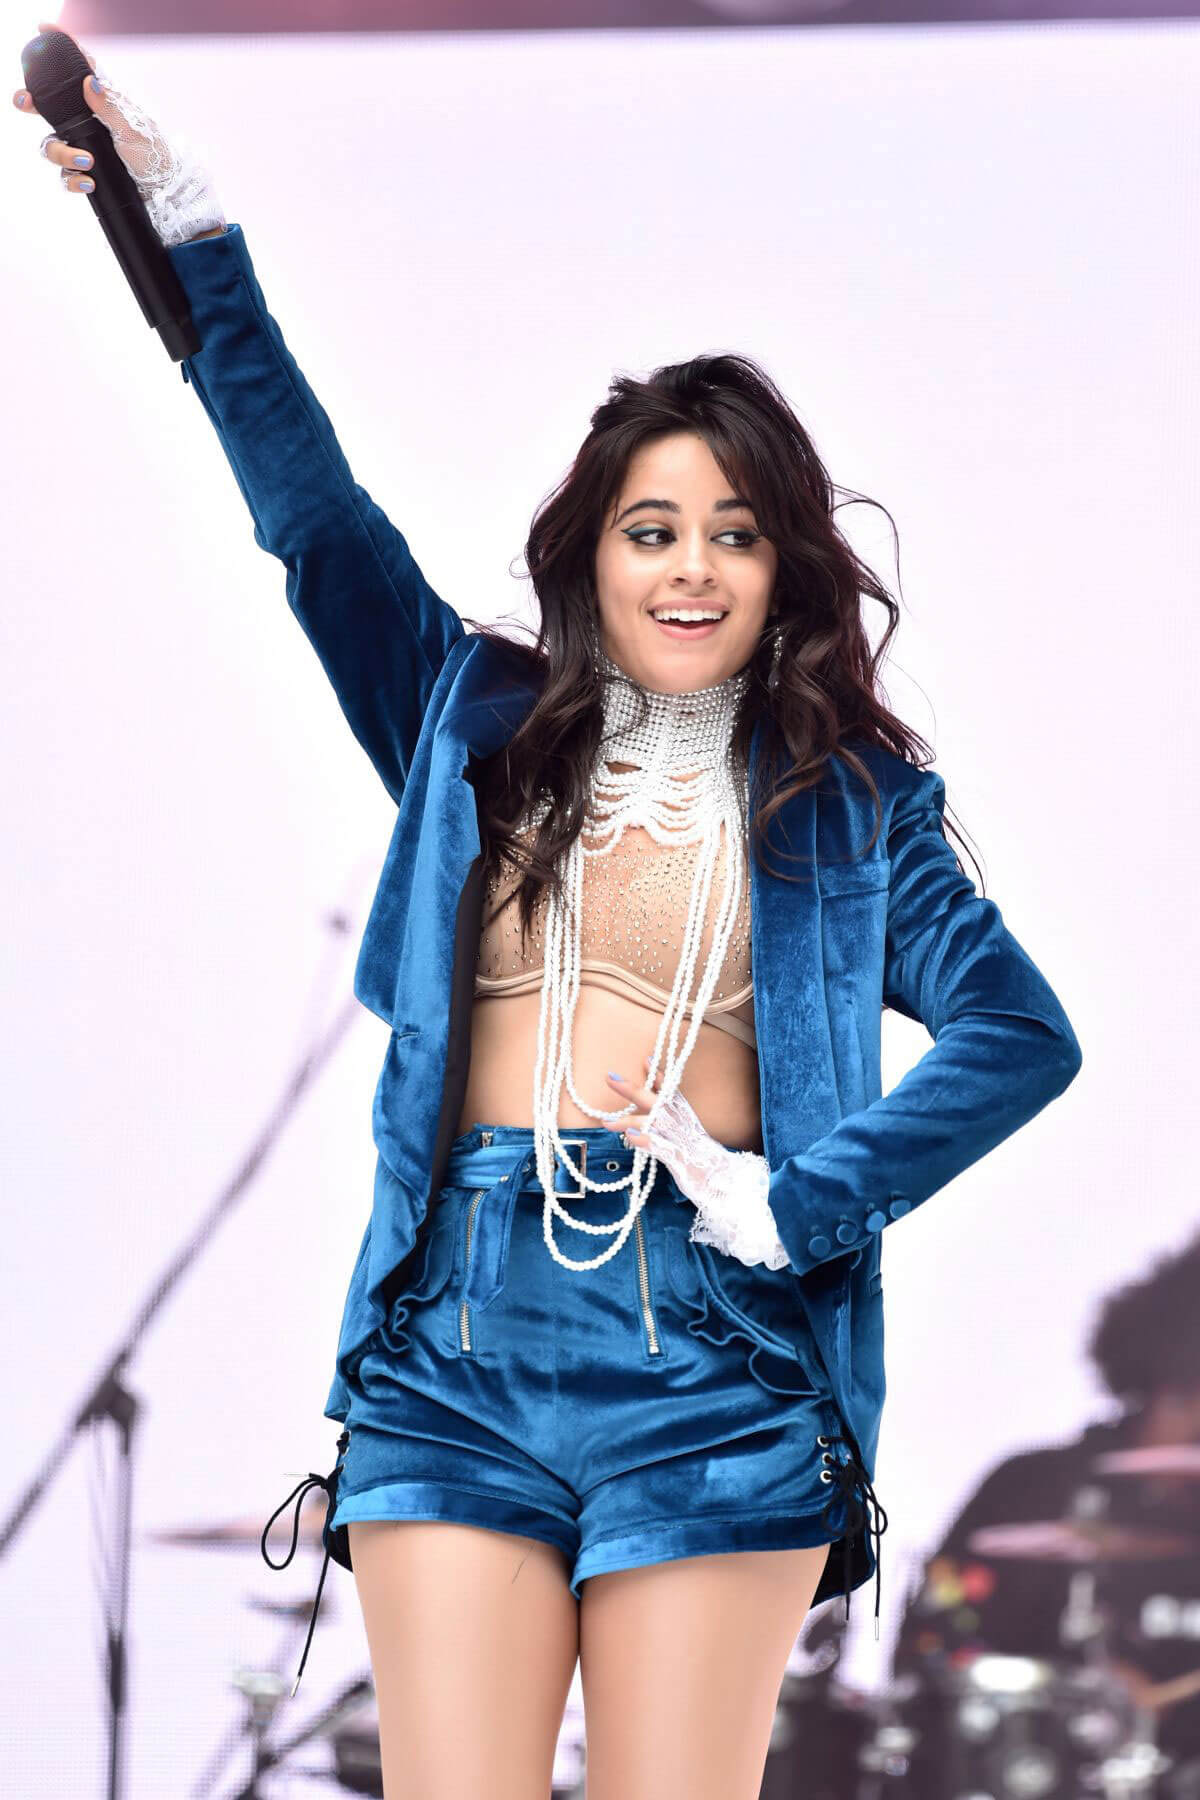 Camila Cabello Performs at Capital Radio Summertime Ball 2018 in London 2018/06/09